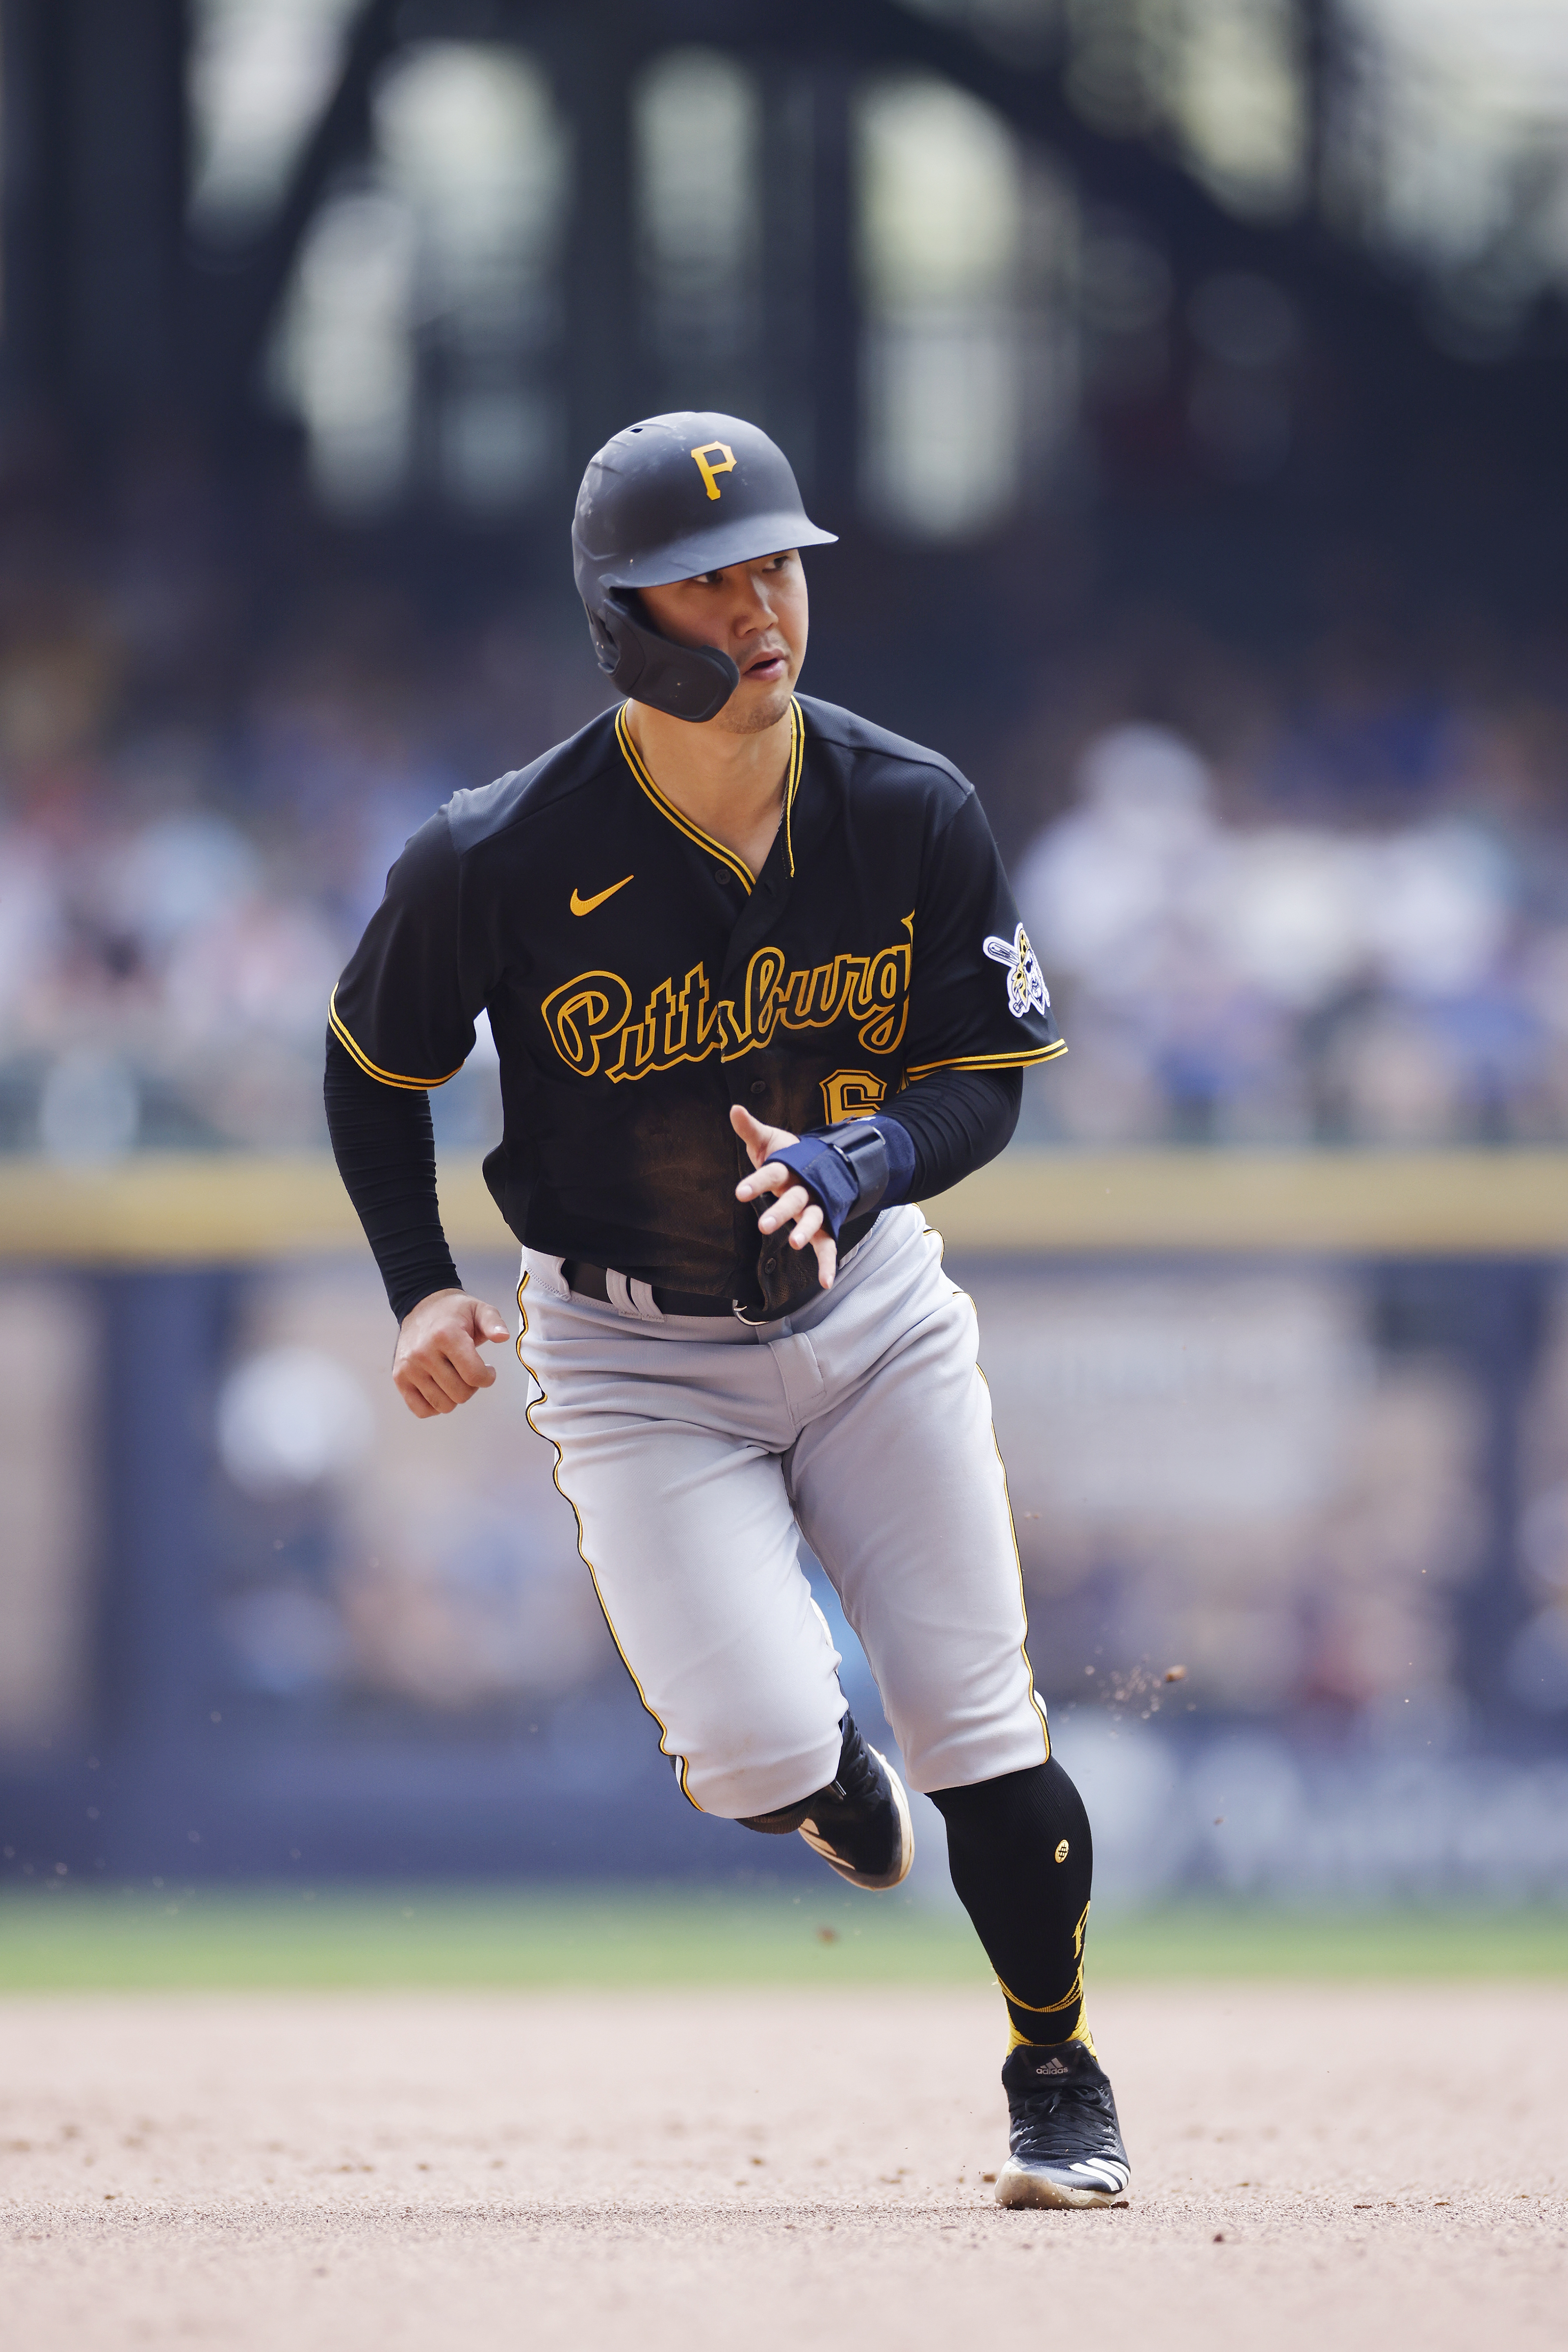 MLB: AUG 04 Pirates at Brewers